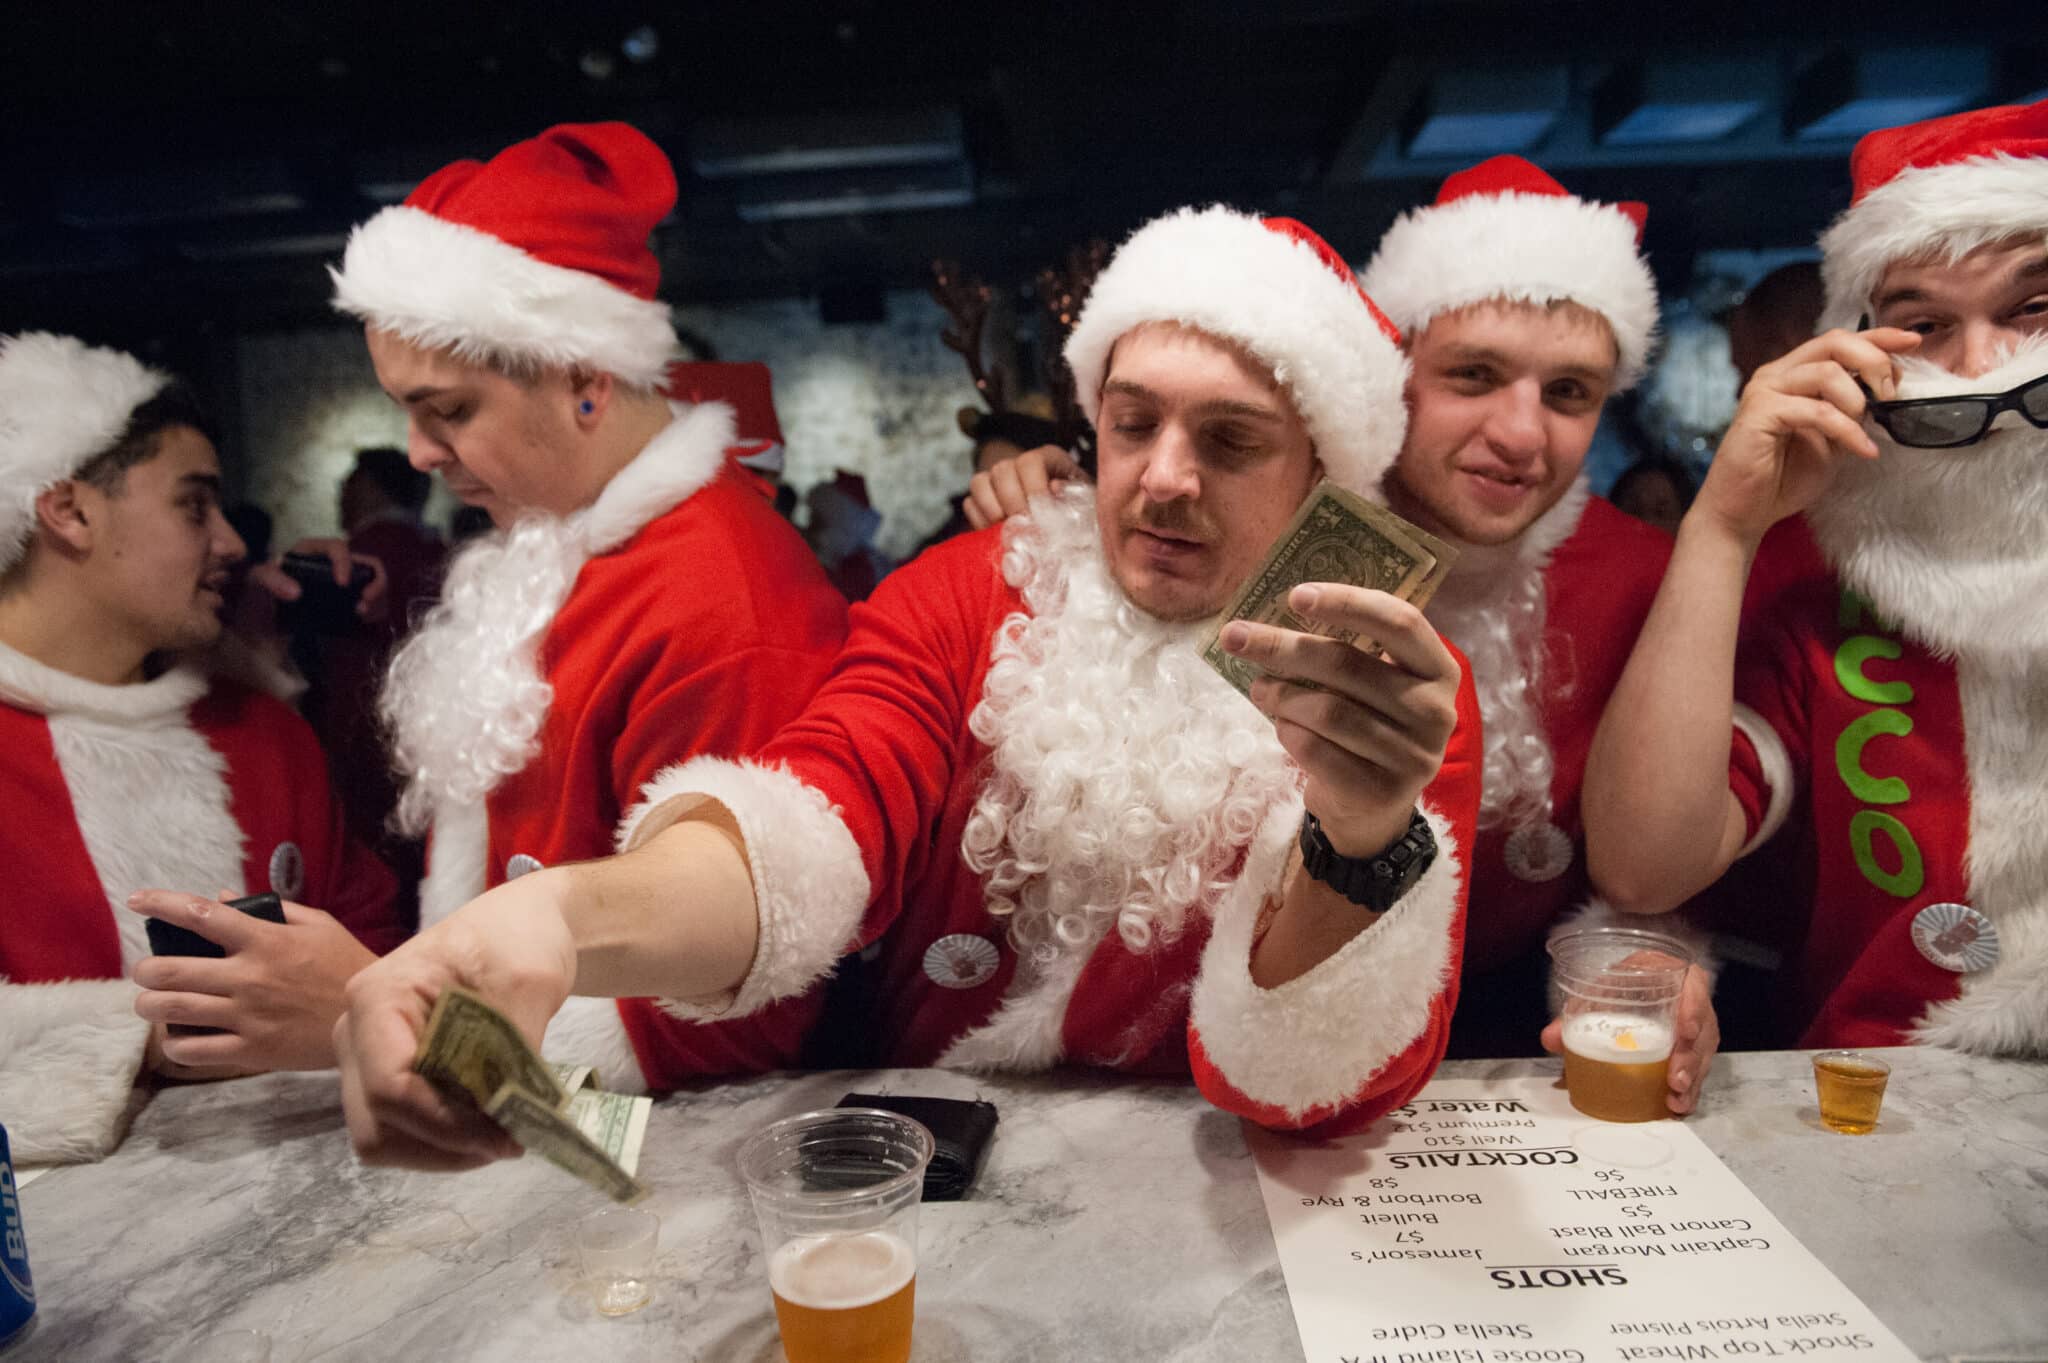 NEW YORK, NY - DECEMBER 12: Men dressed as a Santa drink at a bar called The Hall during the annual SantaCon pub crawl December 12, 2015 in the Brooklyn borough of New York City. Hundreds of revelers take part in the holiday pub crawl, though some local bars and businesses have banned participants in an effort to avoid the typically rowdy SantaCon crowds. (Photo by Stephanie Keith/Getty Images)